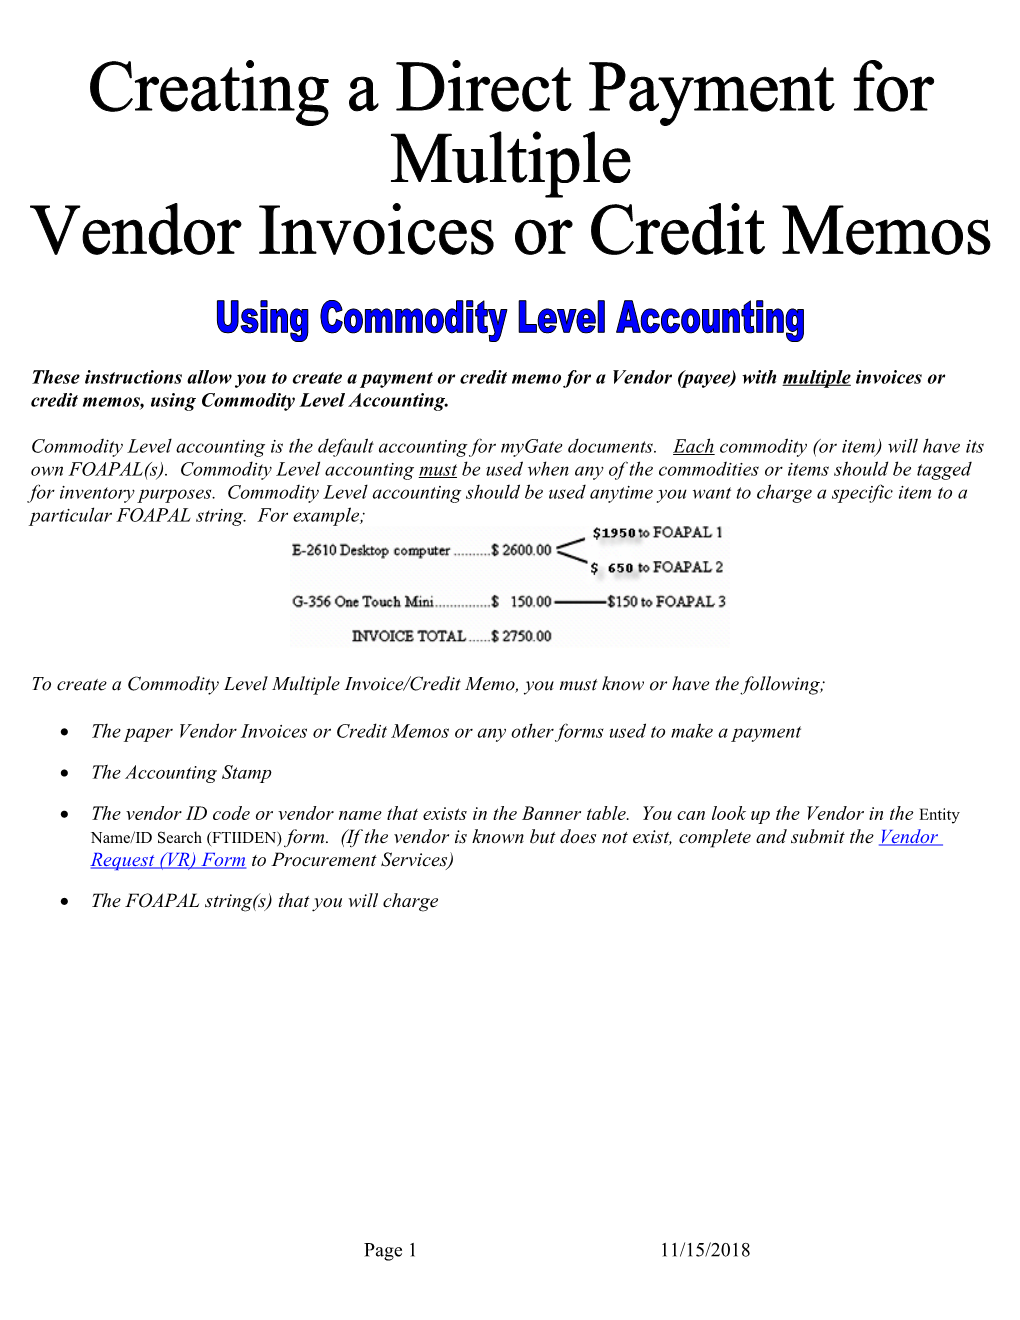 Creating a Payment Or Credit on an Invoice/Credit Memo Form